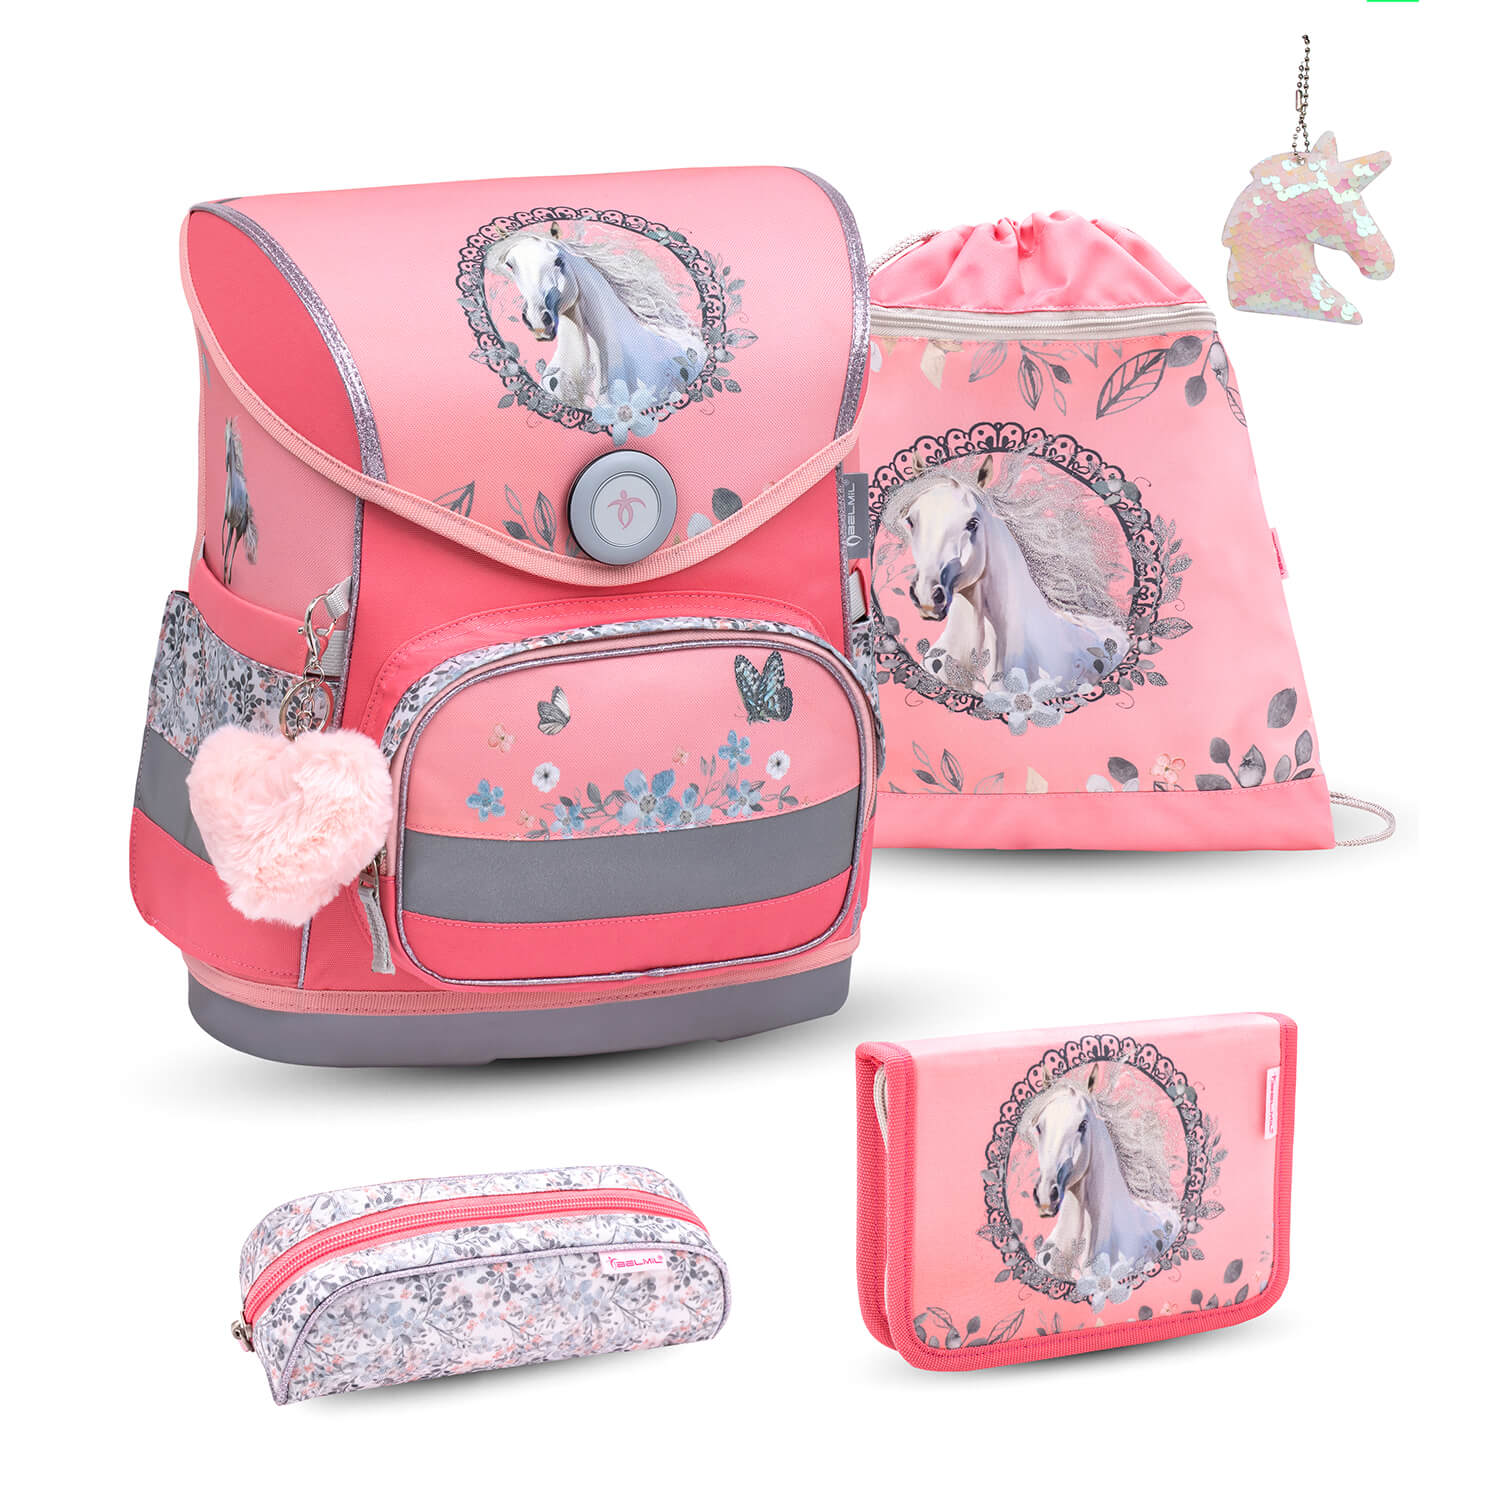 Compact Horse Snowflake schoolbag set 5 pcs with GRATIS keychain